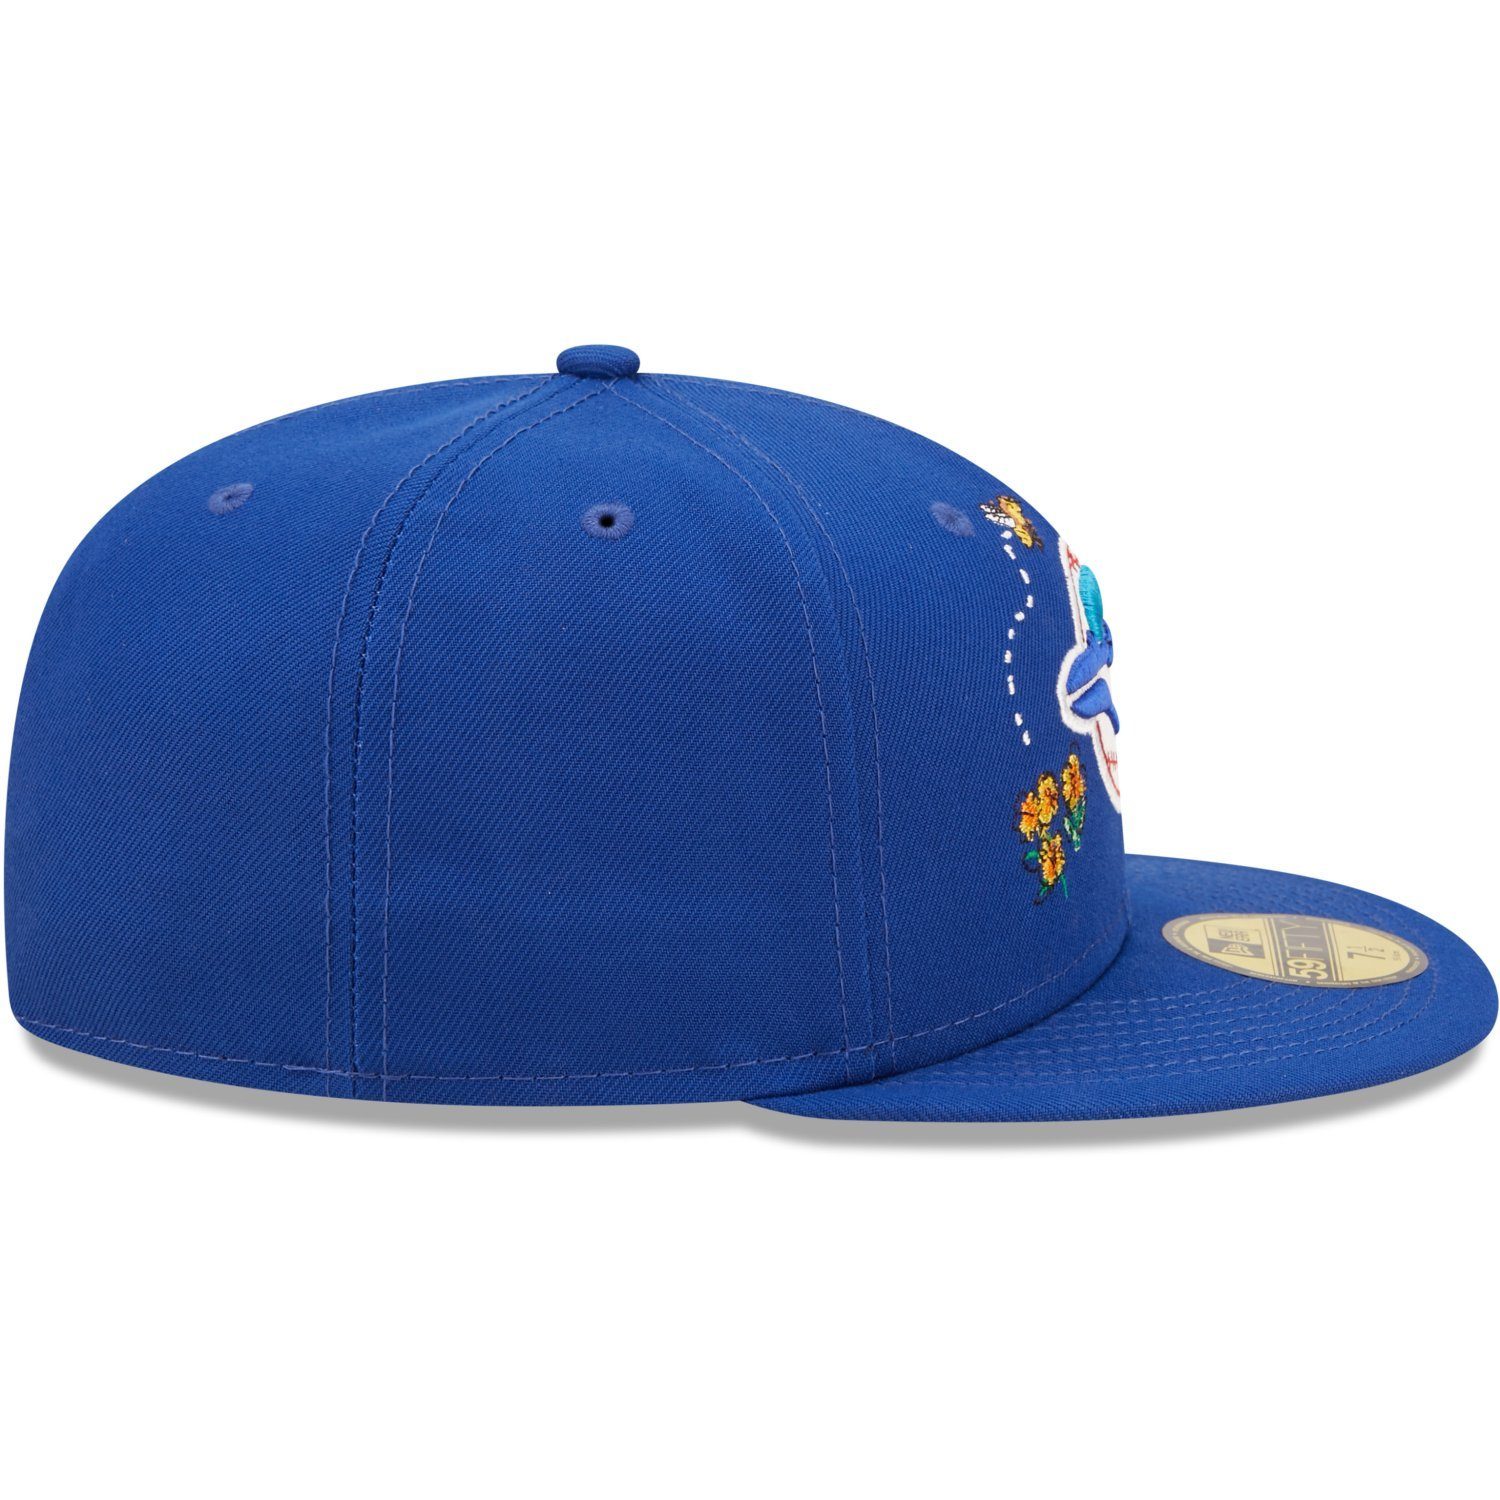 Cap 59Fifty Jays New Era WATER blau FLORAL Toronto Fitted